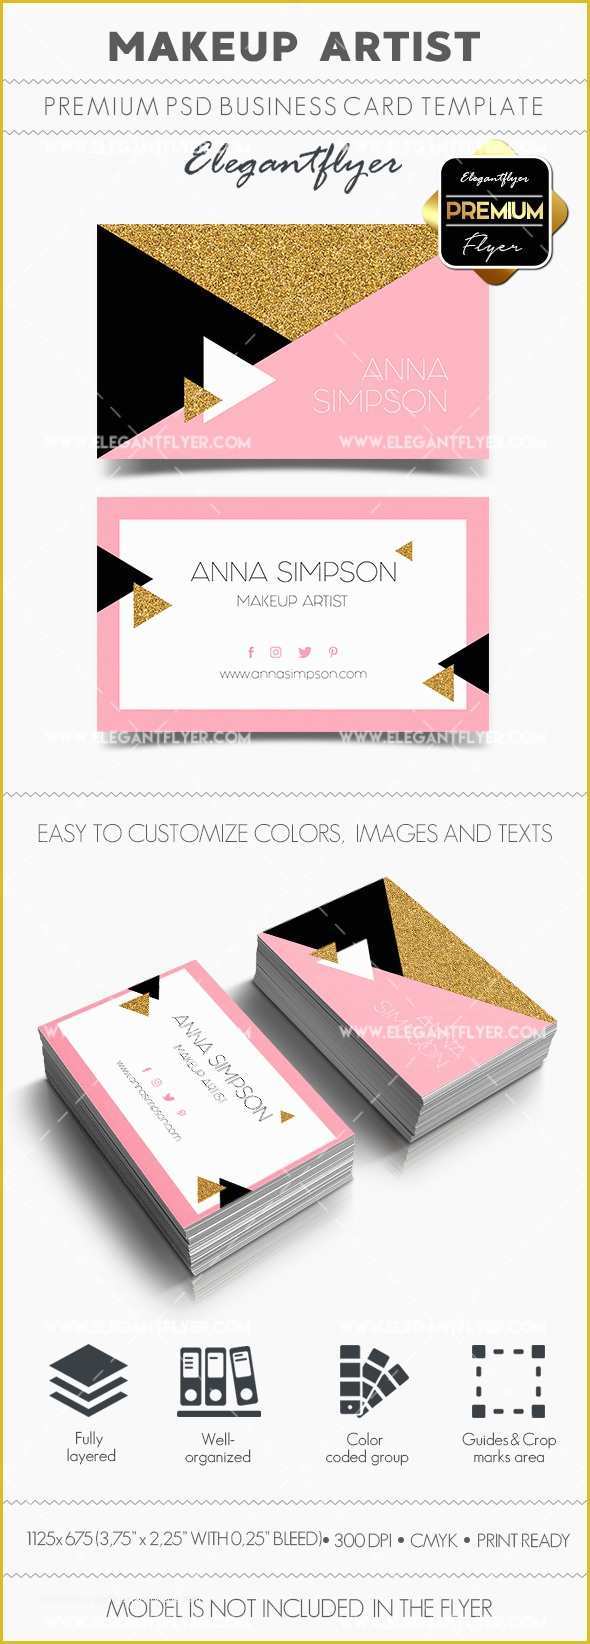 Artist Business Cards Templates Free Of Makeup Artist – Premium Business Card Templates Psd – by